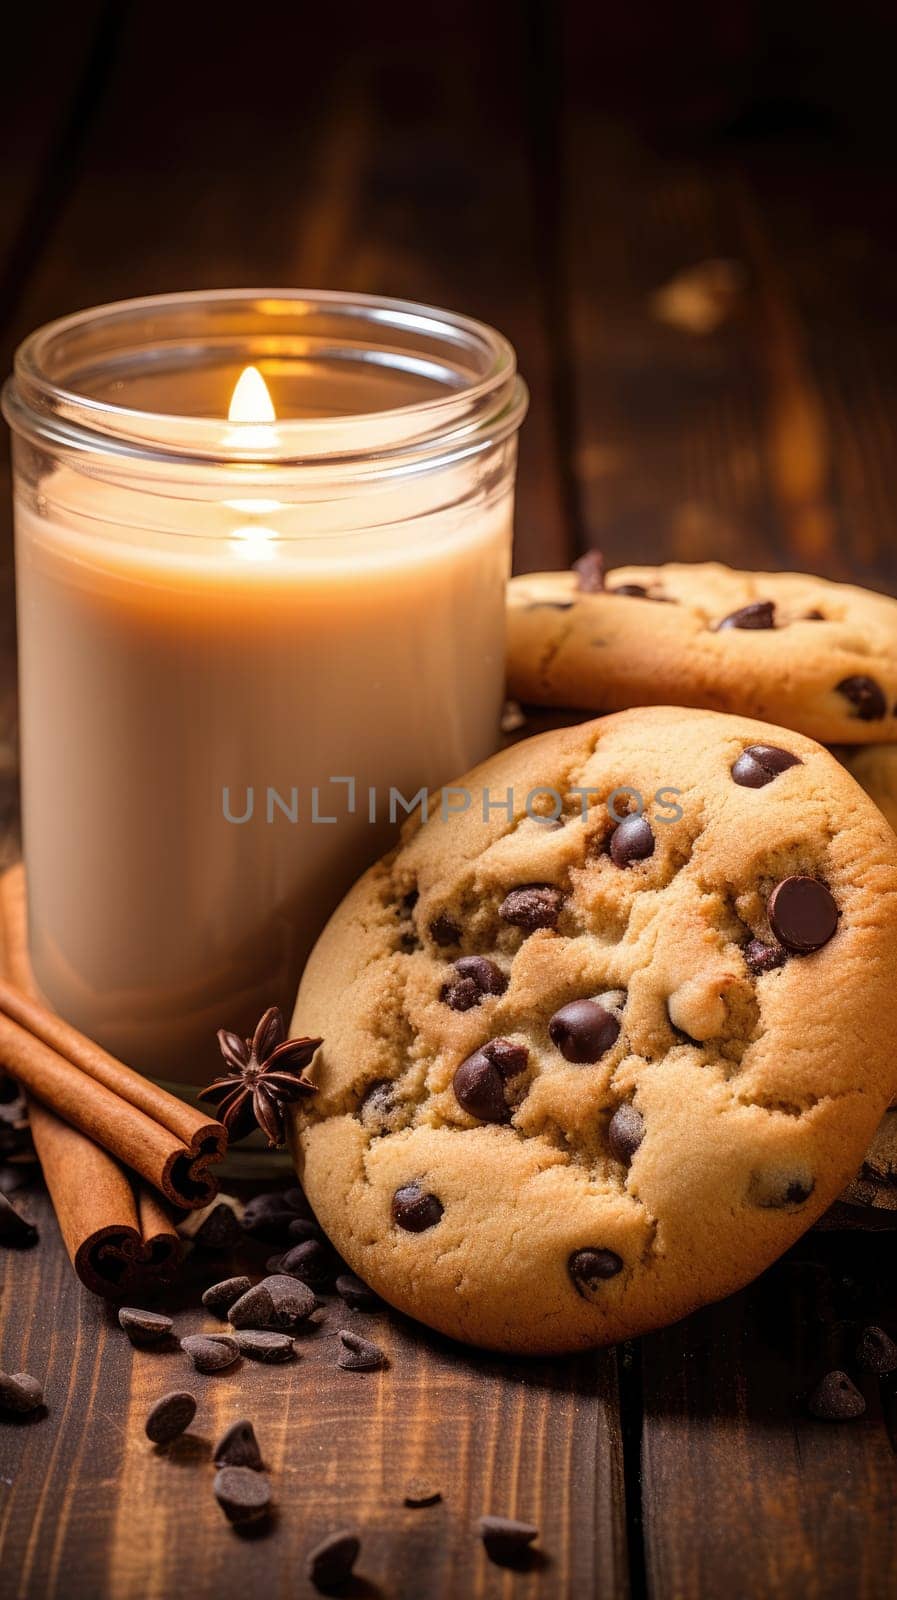 Cookie-scented handmade candles. Cozy photo on a wooden background. AI by natali_brill